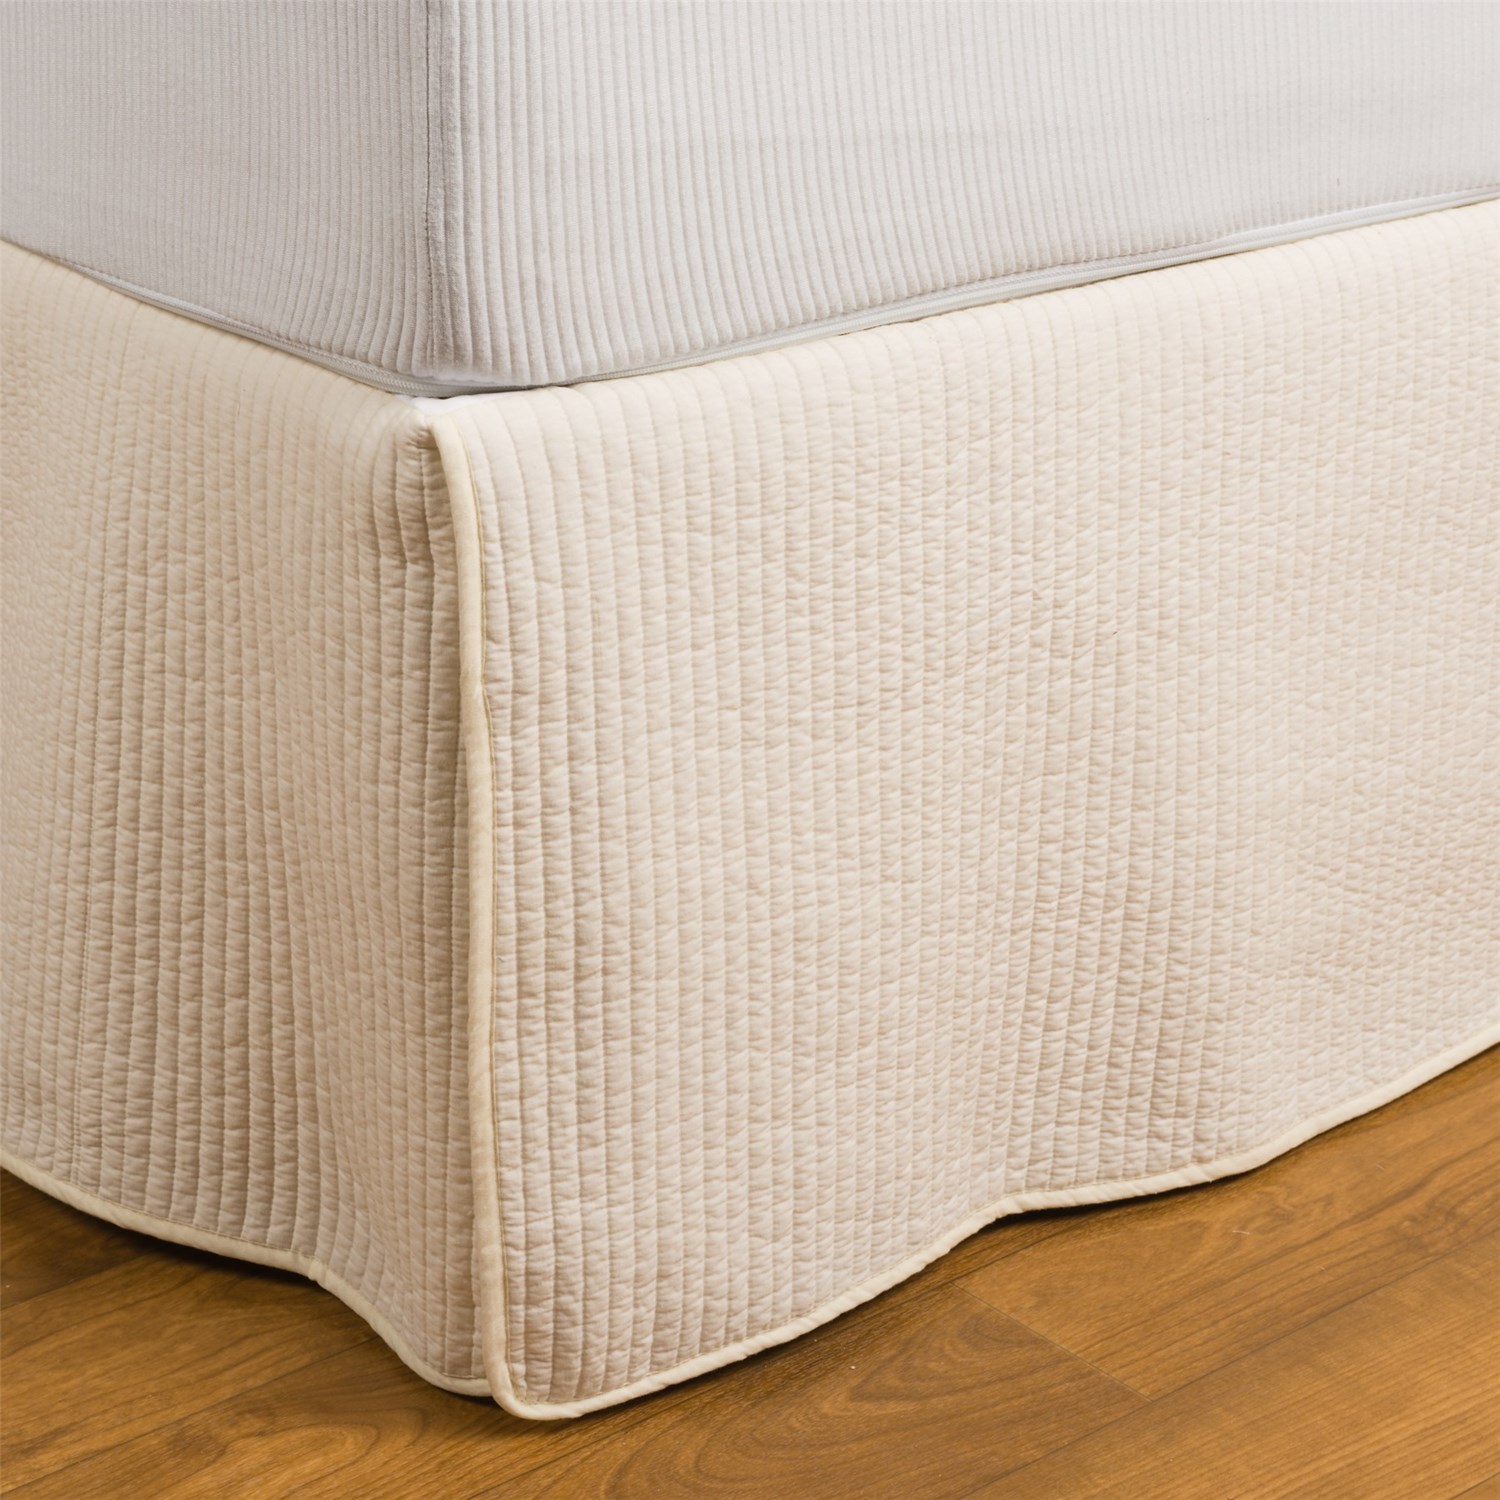 Ivy Hill Home Half Inch Channel Bed Skirt   Twin 8971D 50